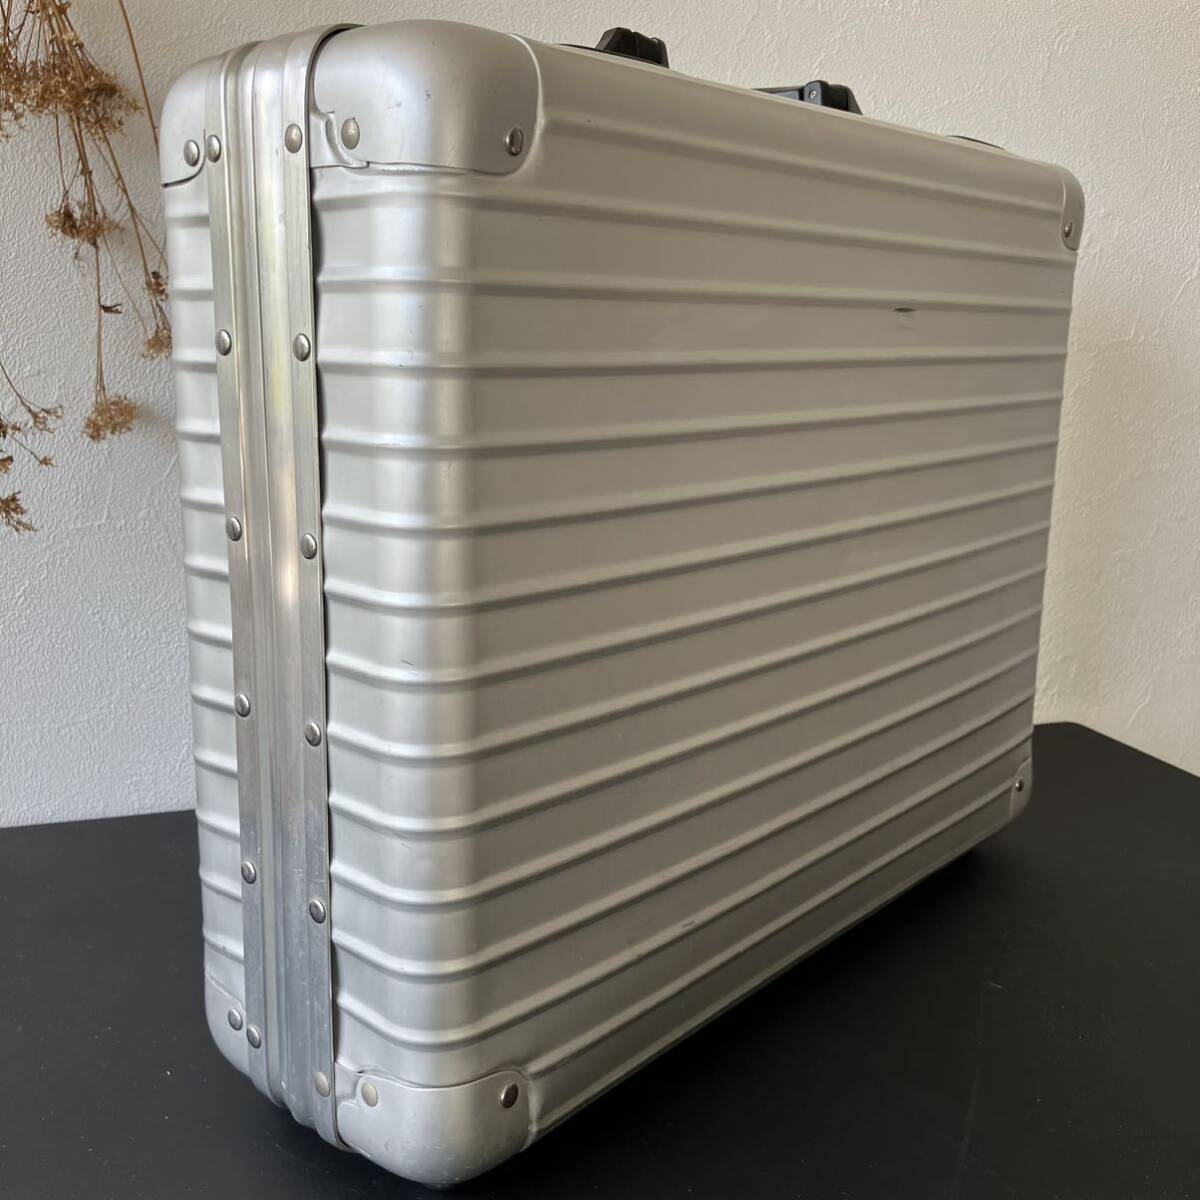 * rare goods [ Germany made ]RIMOWA Rimowa attache case / aluminium duralumin case / document bag / business / records out of production / multifunction storage 